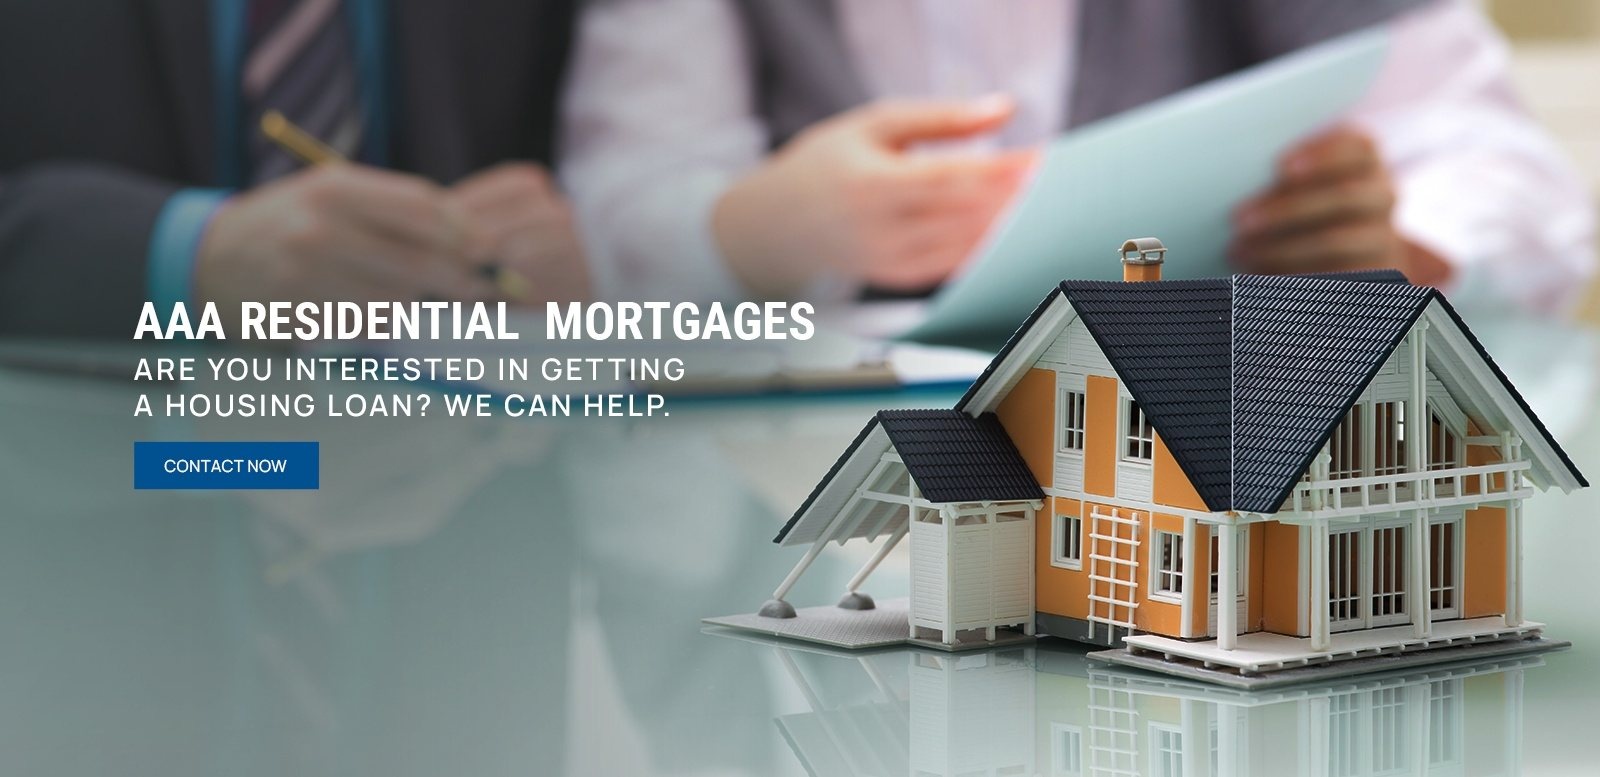 Residential Mortgages by Thornhill Mortgage Agent - MassMortgageGroup.Com